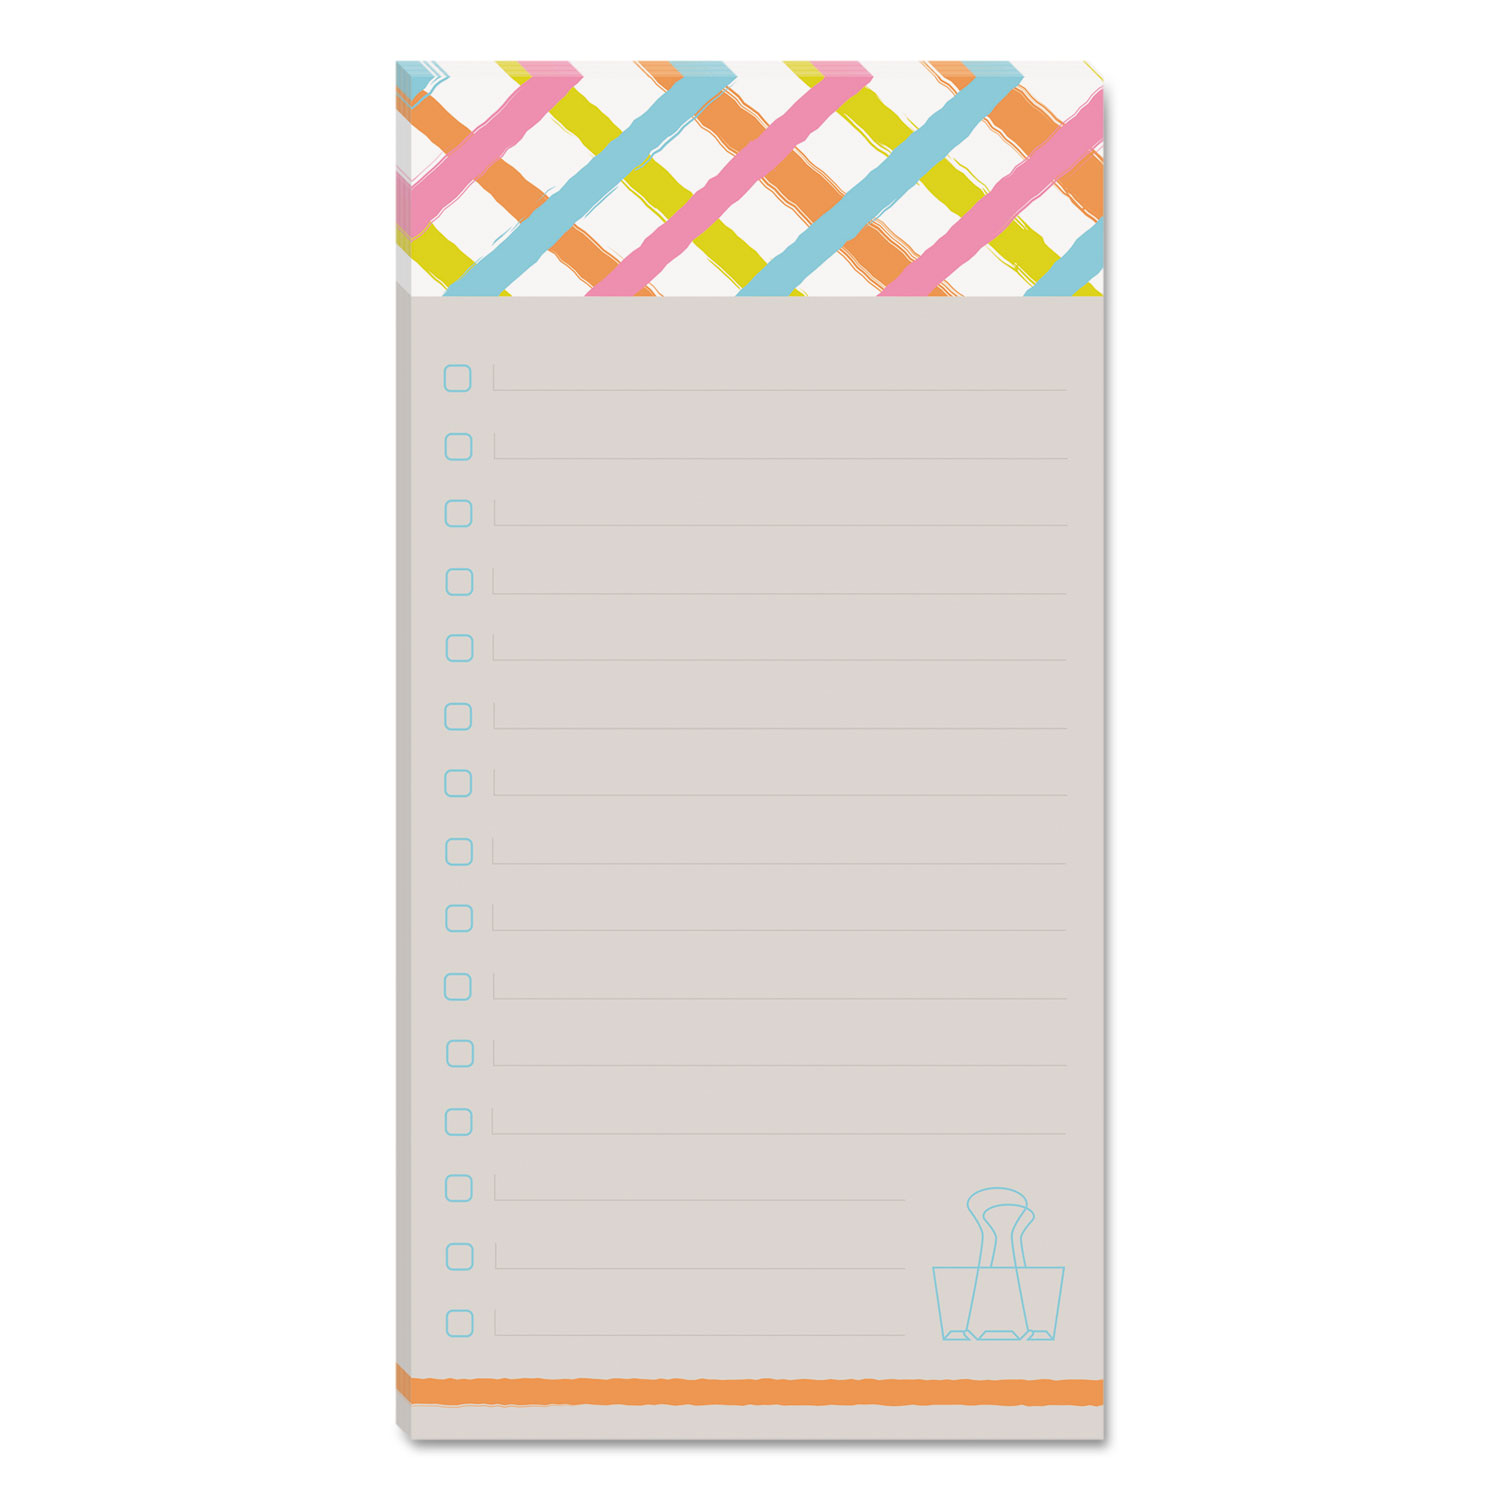  Post-it Notes Super Sticky 7366-OFF3 Printed Note Pads, 4 x 8, Lined, Assorted Designs, 75-Sheet, 3/Pack (MMM7366OFF3) 